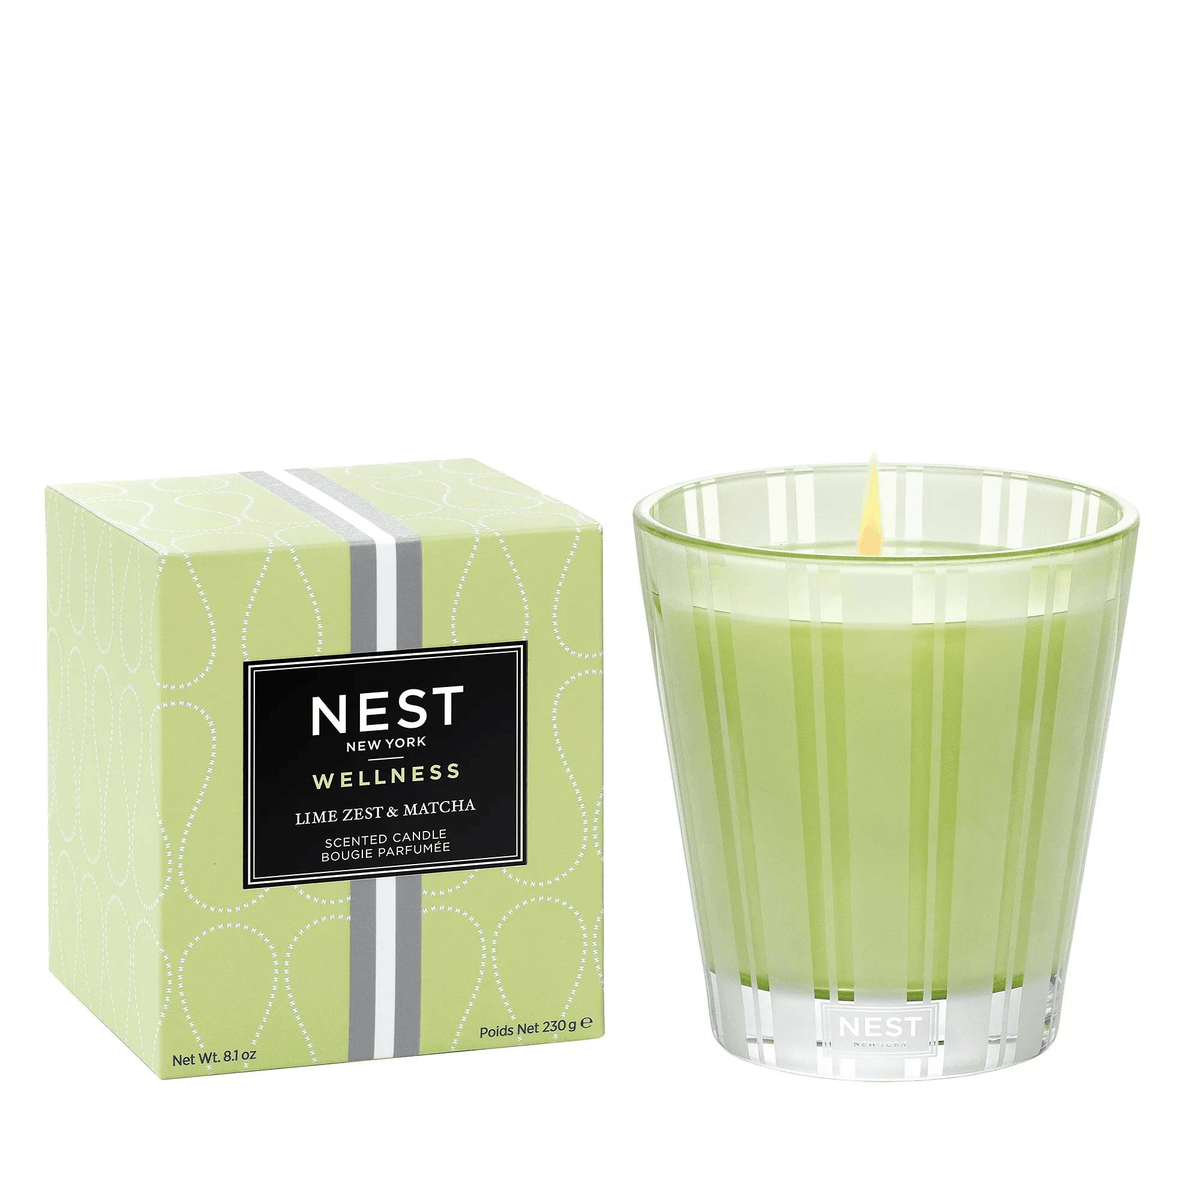 Primary Image of Lime Zest Matcha Classic Candle